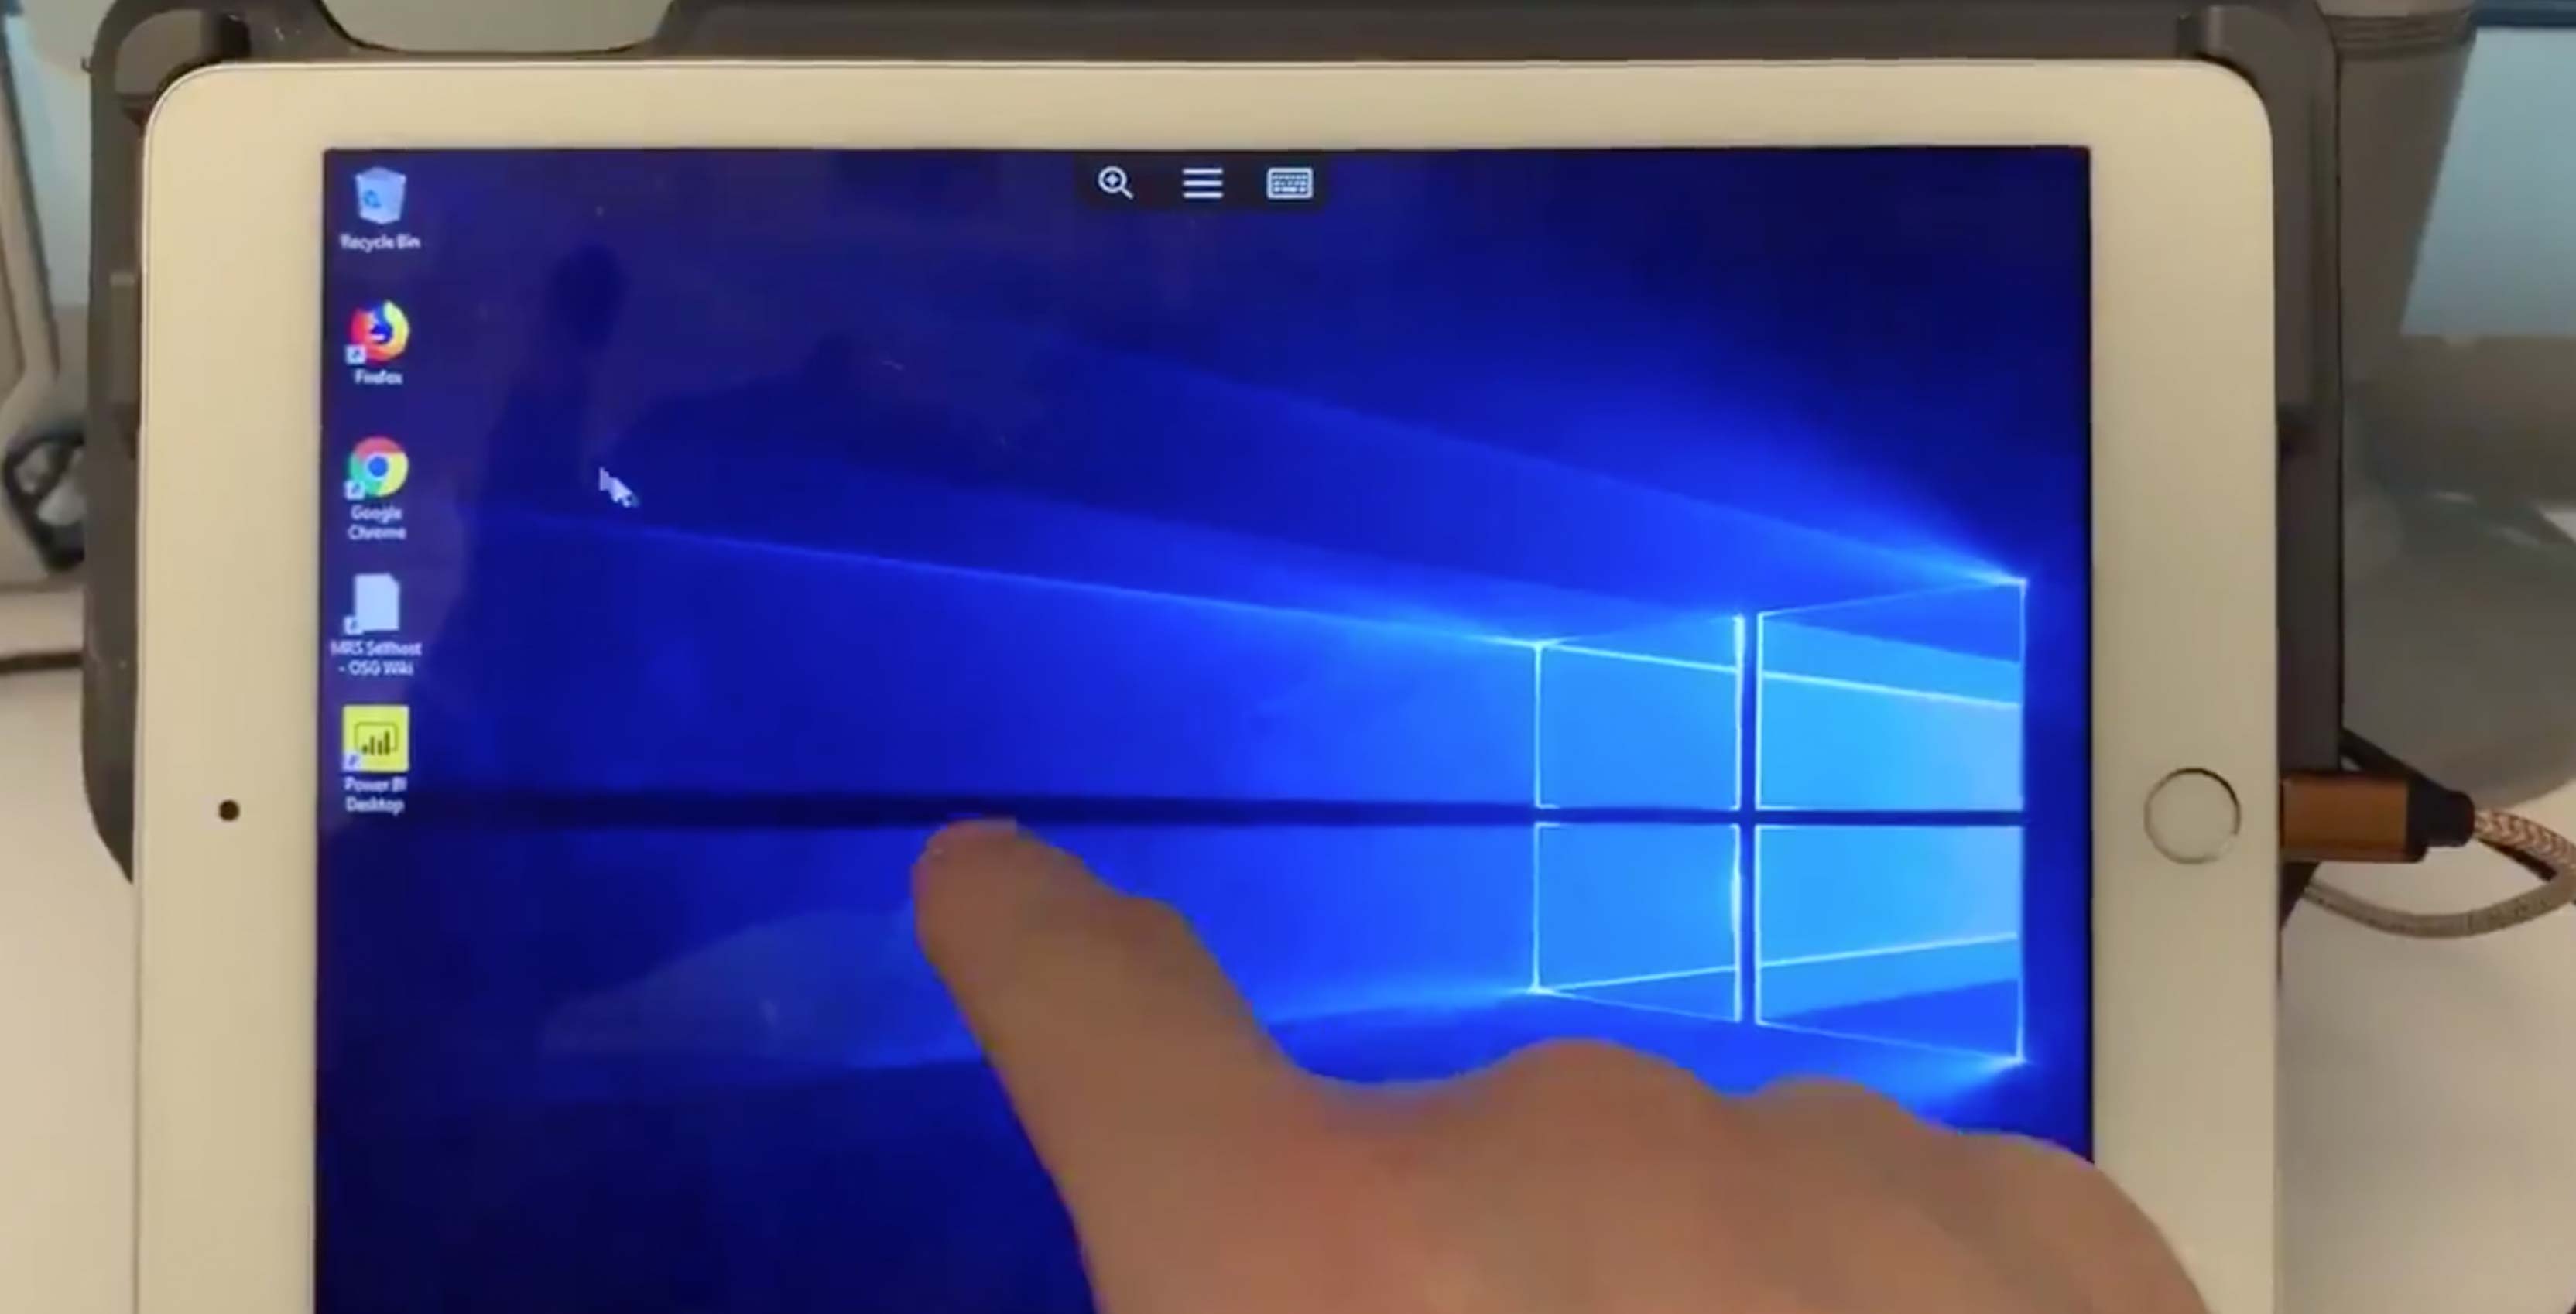 Microsoft is working on a remote desktop app for iPad